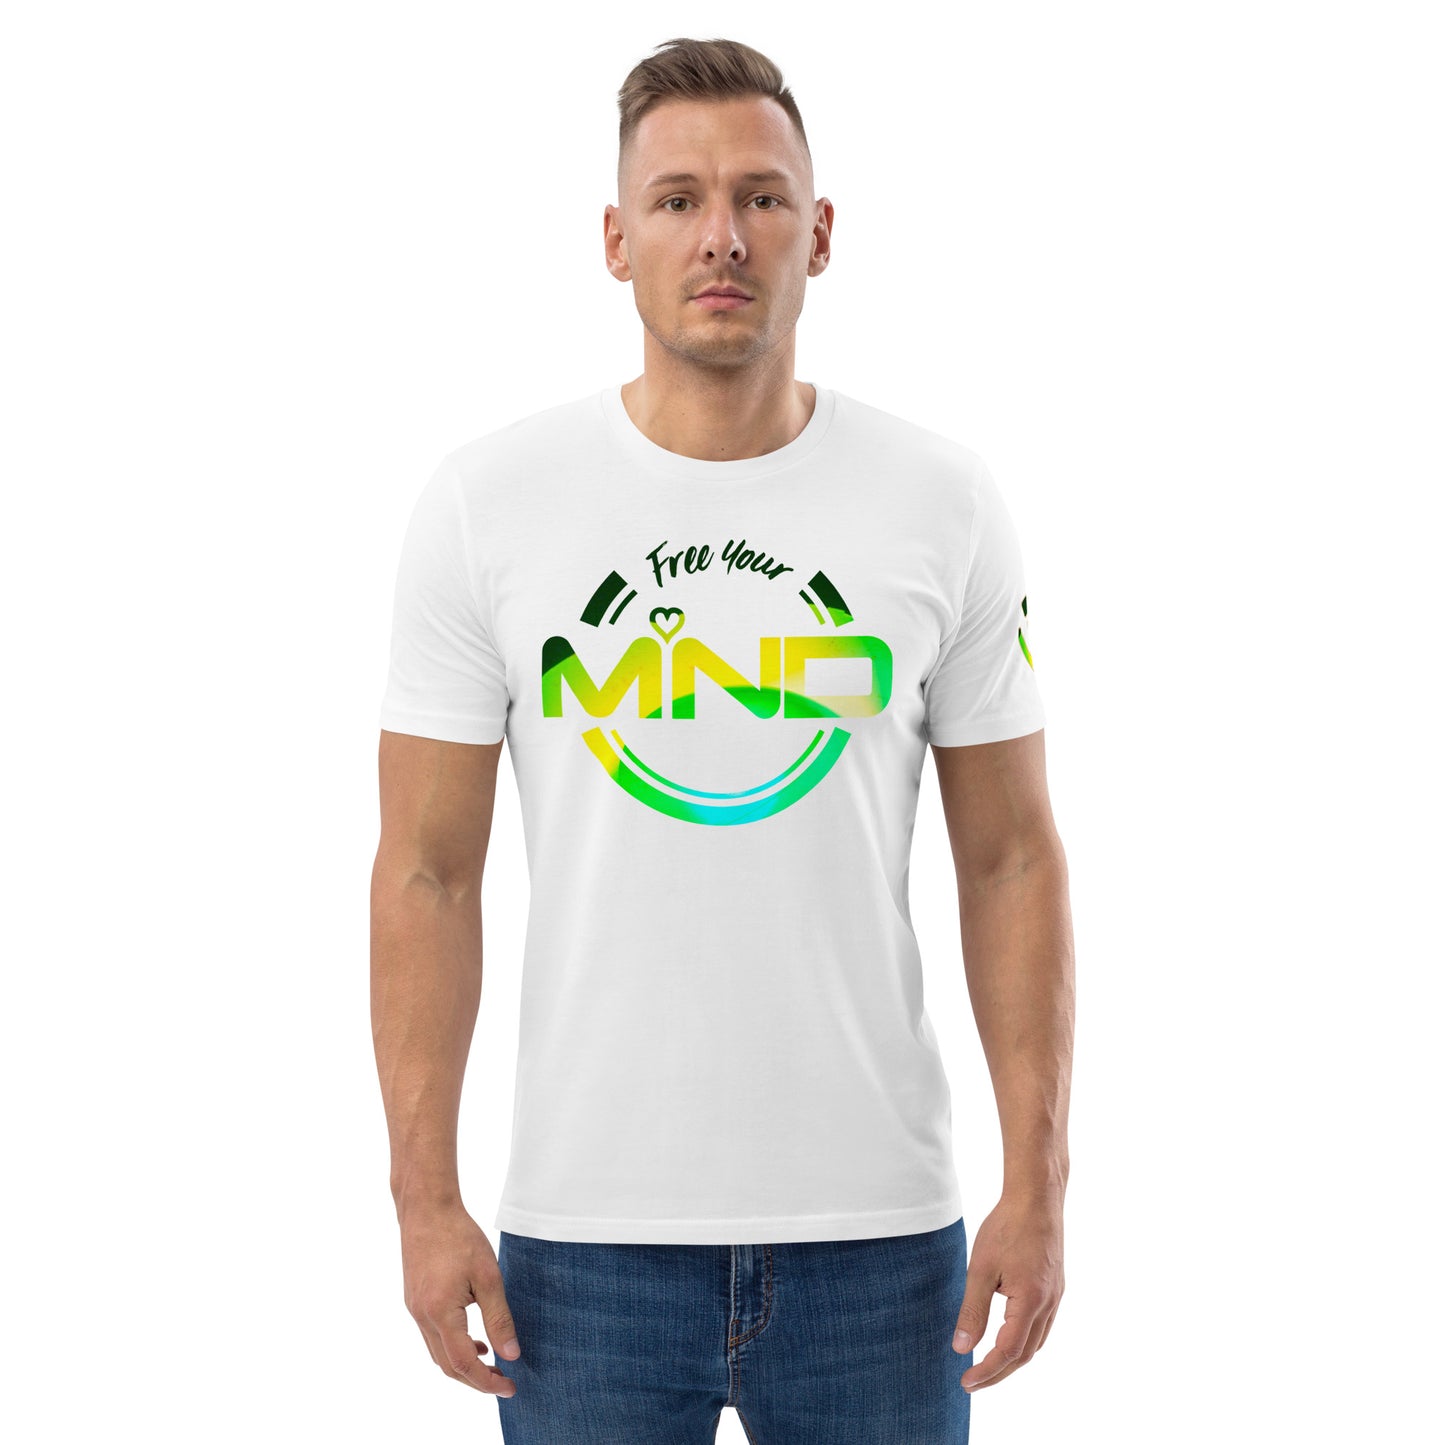 Free Your Mind t-shirt